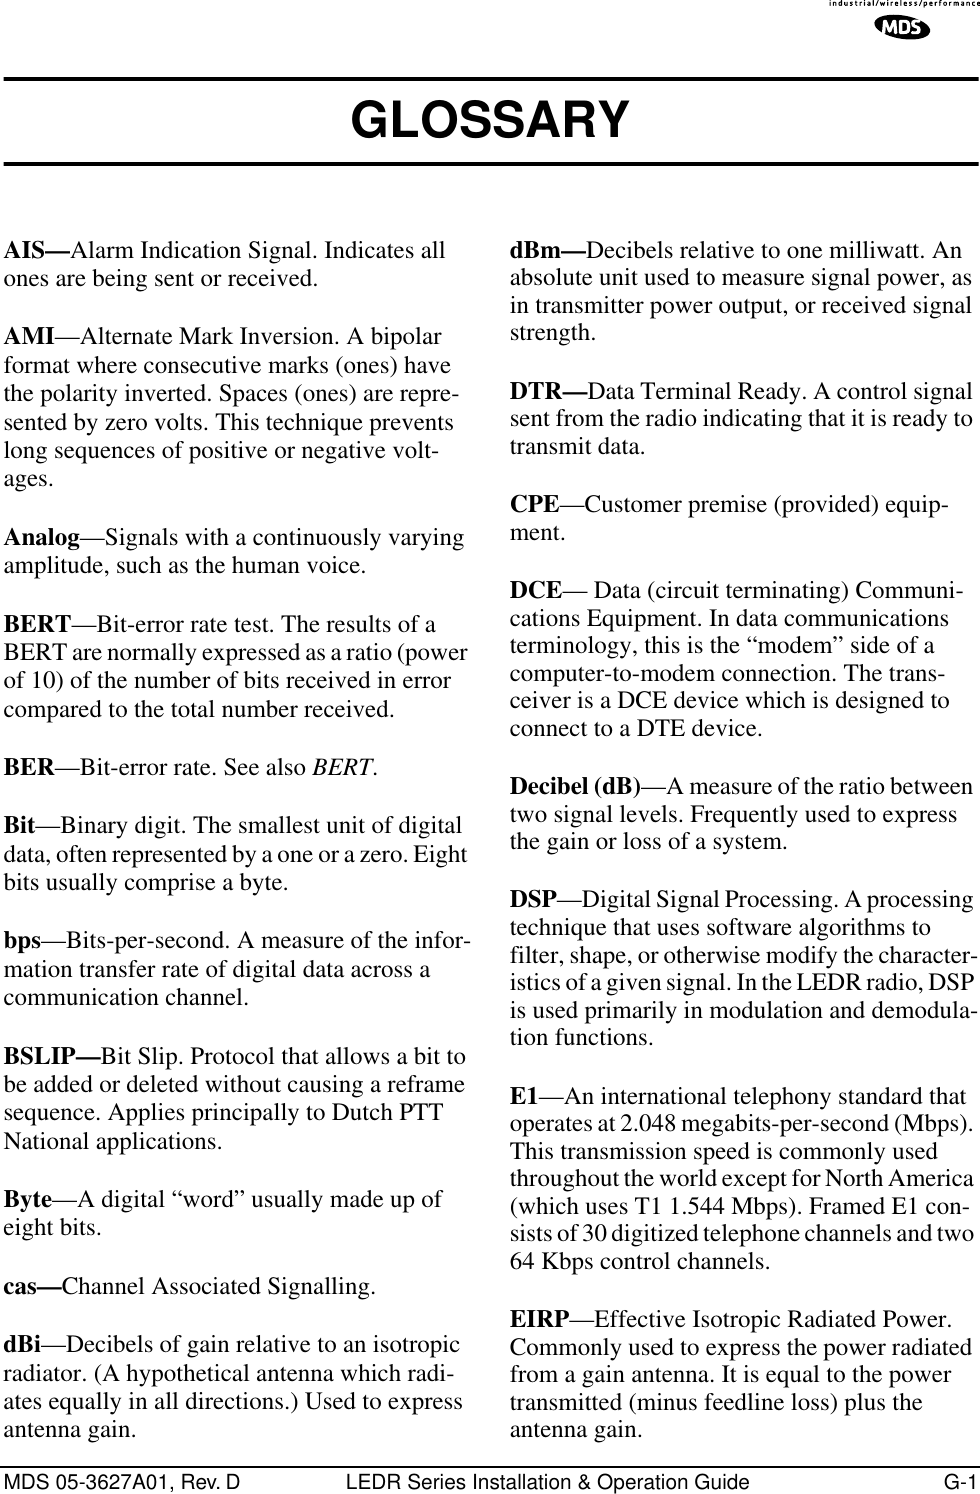 MDS 05-3627A01, Rev. D LEDR Series Installation &amp; Operation Guide G-1GLOSSARY AIS—Alarm Indication Signal. Indicates all ones are being sent or received.AMI—Alternate Mark Inversion. A bipolar format where consecutive marks (ones) have the polarity inverted. Spaces (ones) are repre-sented by zero volts. This technique prevents long sequences of positive or negative volt-ages.Analog—Signals with a continuously varying amplitude, such as the human voice.BERT—Bit-error rate test. The results of a BERT are normally expressed as a ratio (power of 10) of the number of bits received in error compared to the total number received.BER—Bit-error rate. See also BERT.Bit—Binary digit. The smallest unit of digital data, often represented by a one or a zero. Eight bits usually comprise a byte.bps—Bits-per-second. A measure of the infor-mation transfer rate of digital data across a communication channel.BSLIP—Bit Slip. Protocol that allows a bit to be added or deleted without causing a reframe sequence. Applies principally to Dutch PTT National applications.Byte—A digital “word” usually made up of eight bits.cas—Channel Associated Signalling.dBi—Decibels of gain relative to an isotropic radiator. (A hypothetical antenna which radi-ates equally in all directions.) Used to express antenna gain.dBm—Decibels relative to one milliwatt. An absolute unit used to measure signal power, as in transmitter power output, or received signal strength.DTR—Data Terminal Ready. A control signal sent from the radio indicating that it is ready to transmit data.CPE—Customer premise (provided) equip-ment.DCE— Data (circuit terminating) Communi-cations Equipment. In data communications terminology, this is the “modem” side of a computer-to-modem connection. The trans-ceiver is a DCE device which is designed to connect to a DTE device.Decibel (dB)—A measure of the ratio between two signal levels. Frequently used to express the gain or loss of a system.DSP—Digital Signal Processing. A processing technique that uses software algorithms to filter, shape, or otherwise modify the character-istics of a given signal. In the LEDR radio, DSP is used primarily in modulation and demodula-tion functions.E1—An international telephony standard that operates at 2.048 megabits-per-second (Mbps). This transmission speed is commonly used throughout the world except for North America (which uses T1 1.544 Mbps). Framed E1 con-sists of 30 digitized telephone channels and two 64 Kbps control channels.EIRP—Effective Isotropic Radiated Power. Commonly used to express the power radiated from a gain antenna. It is equal to the power transmitted (minus feedline loss) plus the antenna gain.